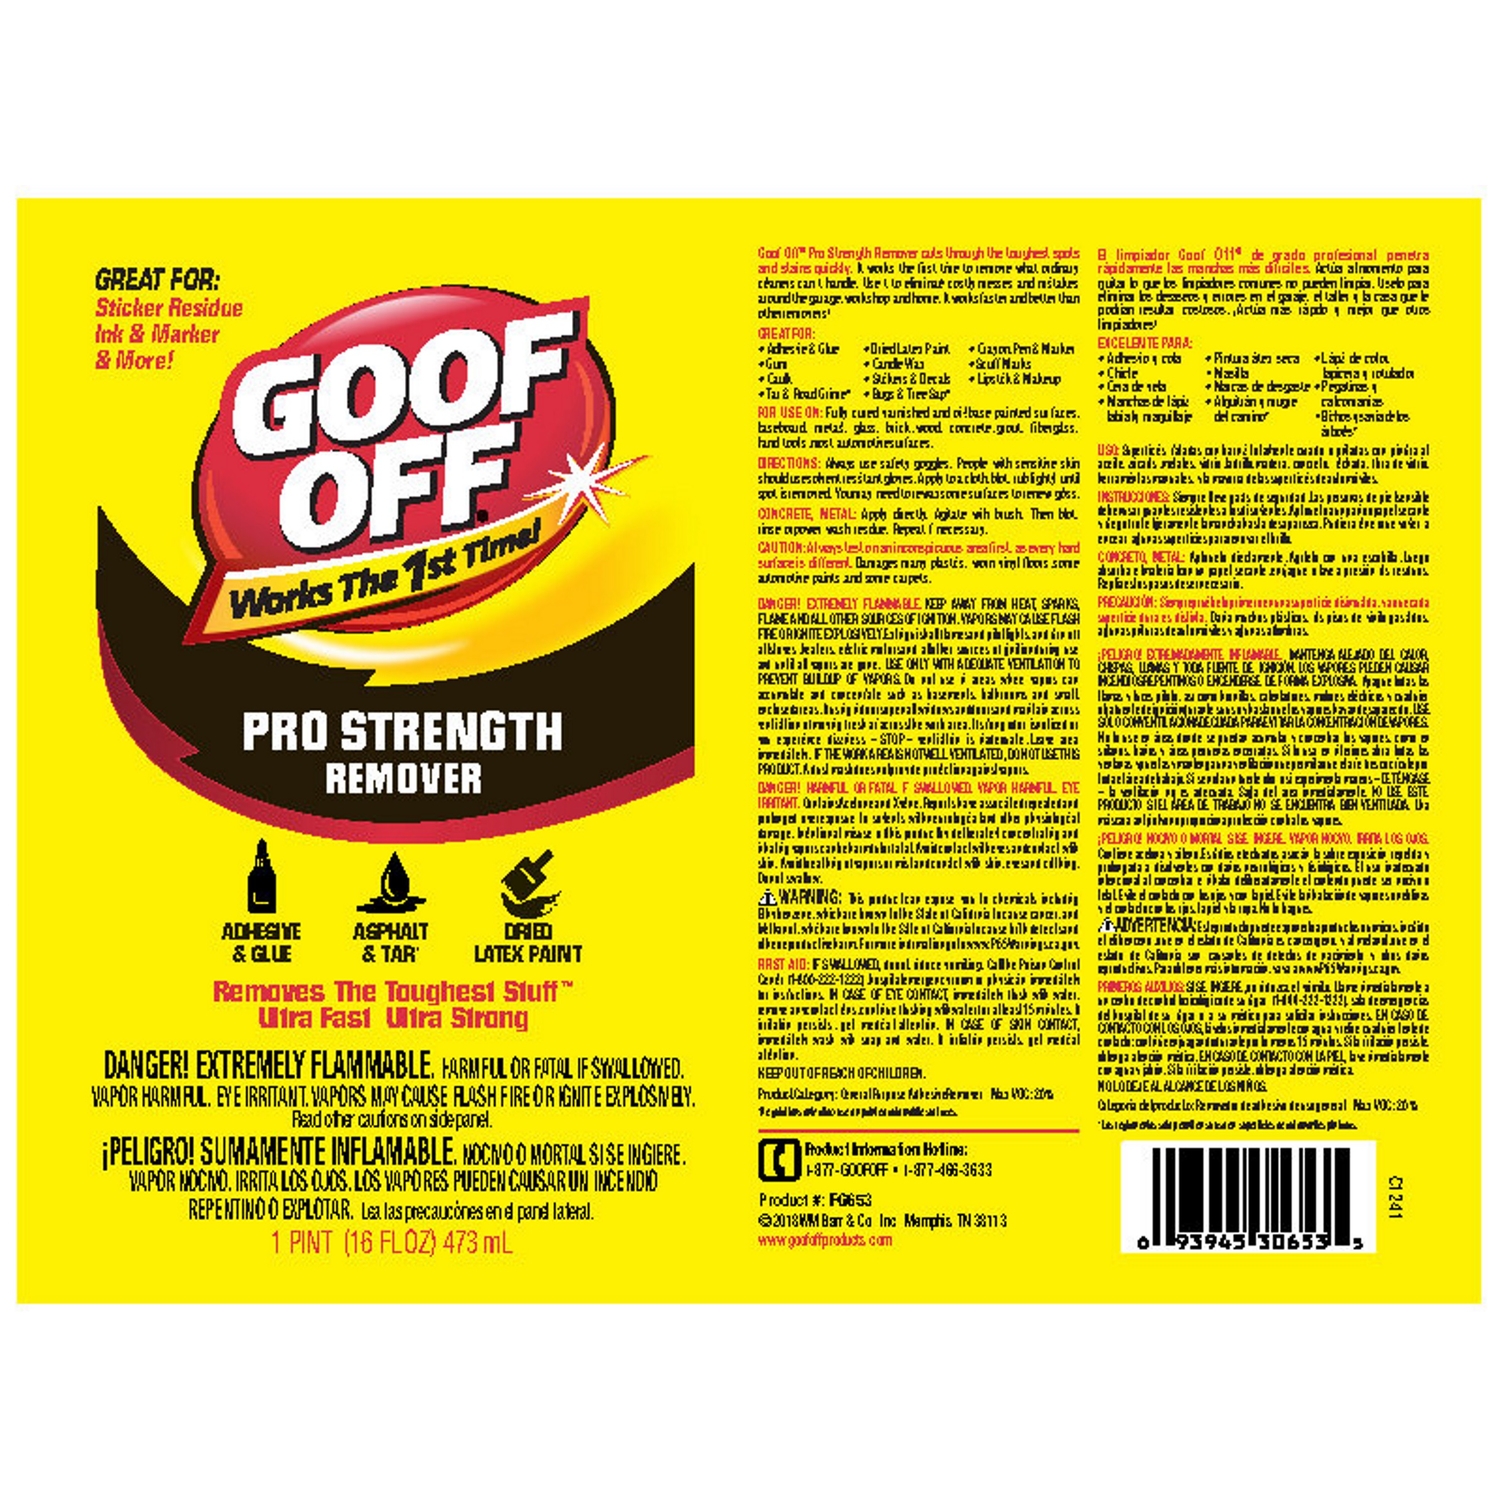 Goof Off Pro Strength All Purpose Remover 1 pt